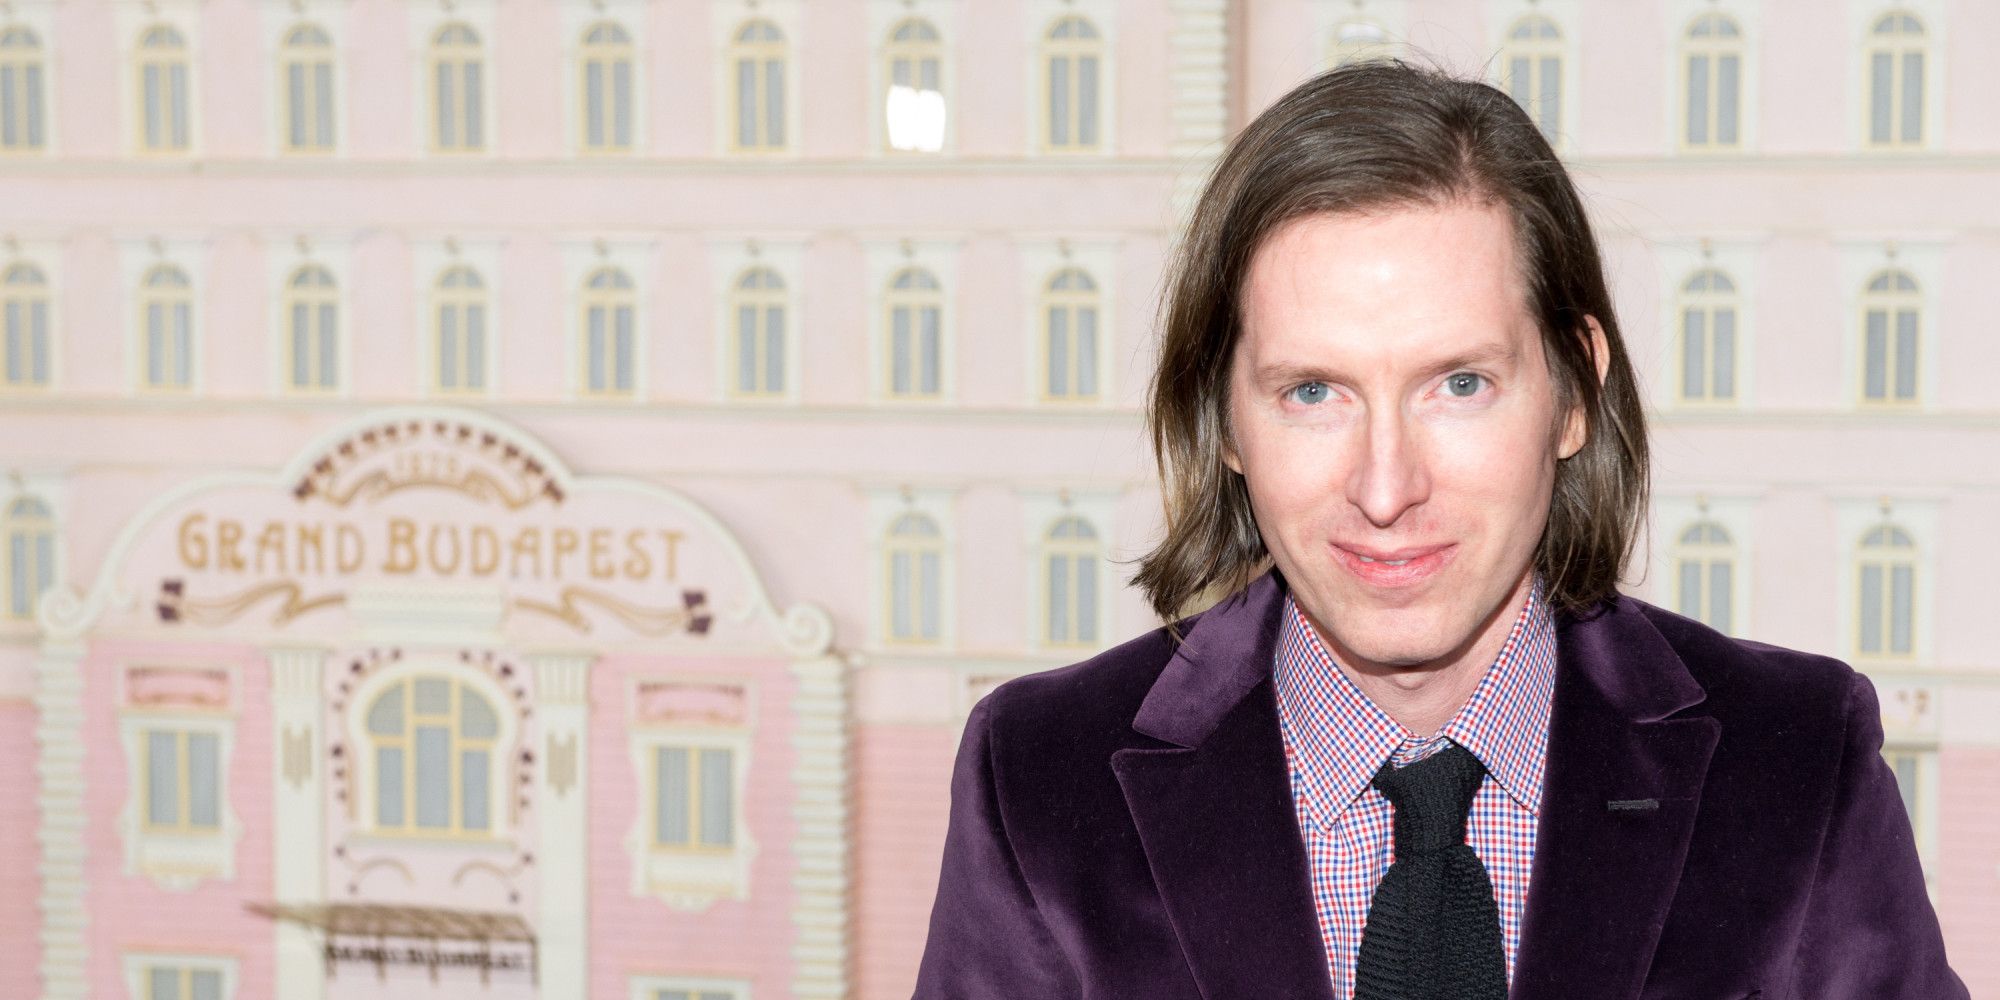 Wes Anderson standing in front of the model of the Grand Budapest Hotel